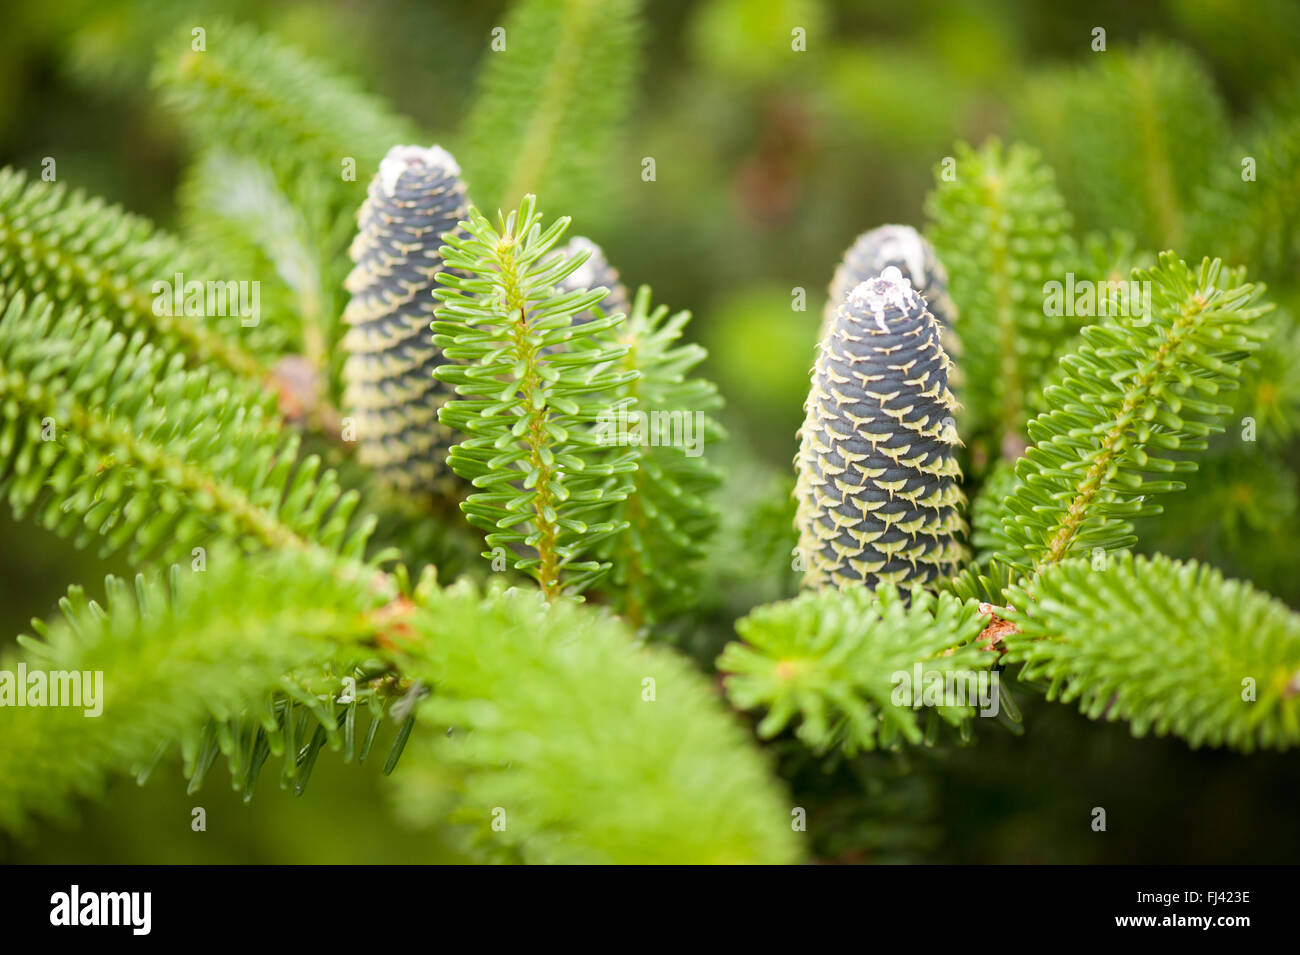 Fir cones on twig shoots in June, fresh evergreen coniferous Abies tree twigs with needle like flattened leaves and cylindrical Stock Photo